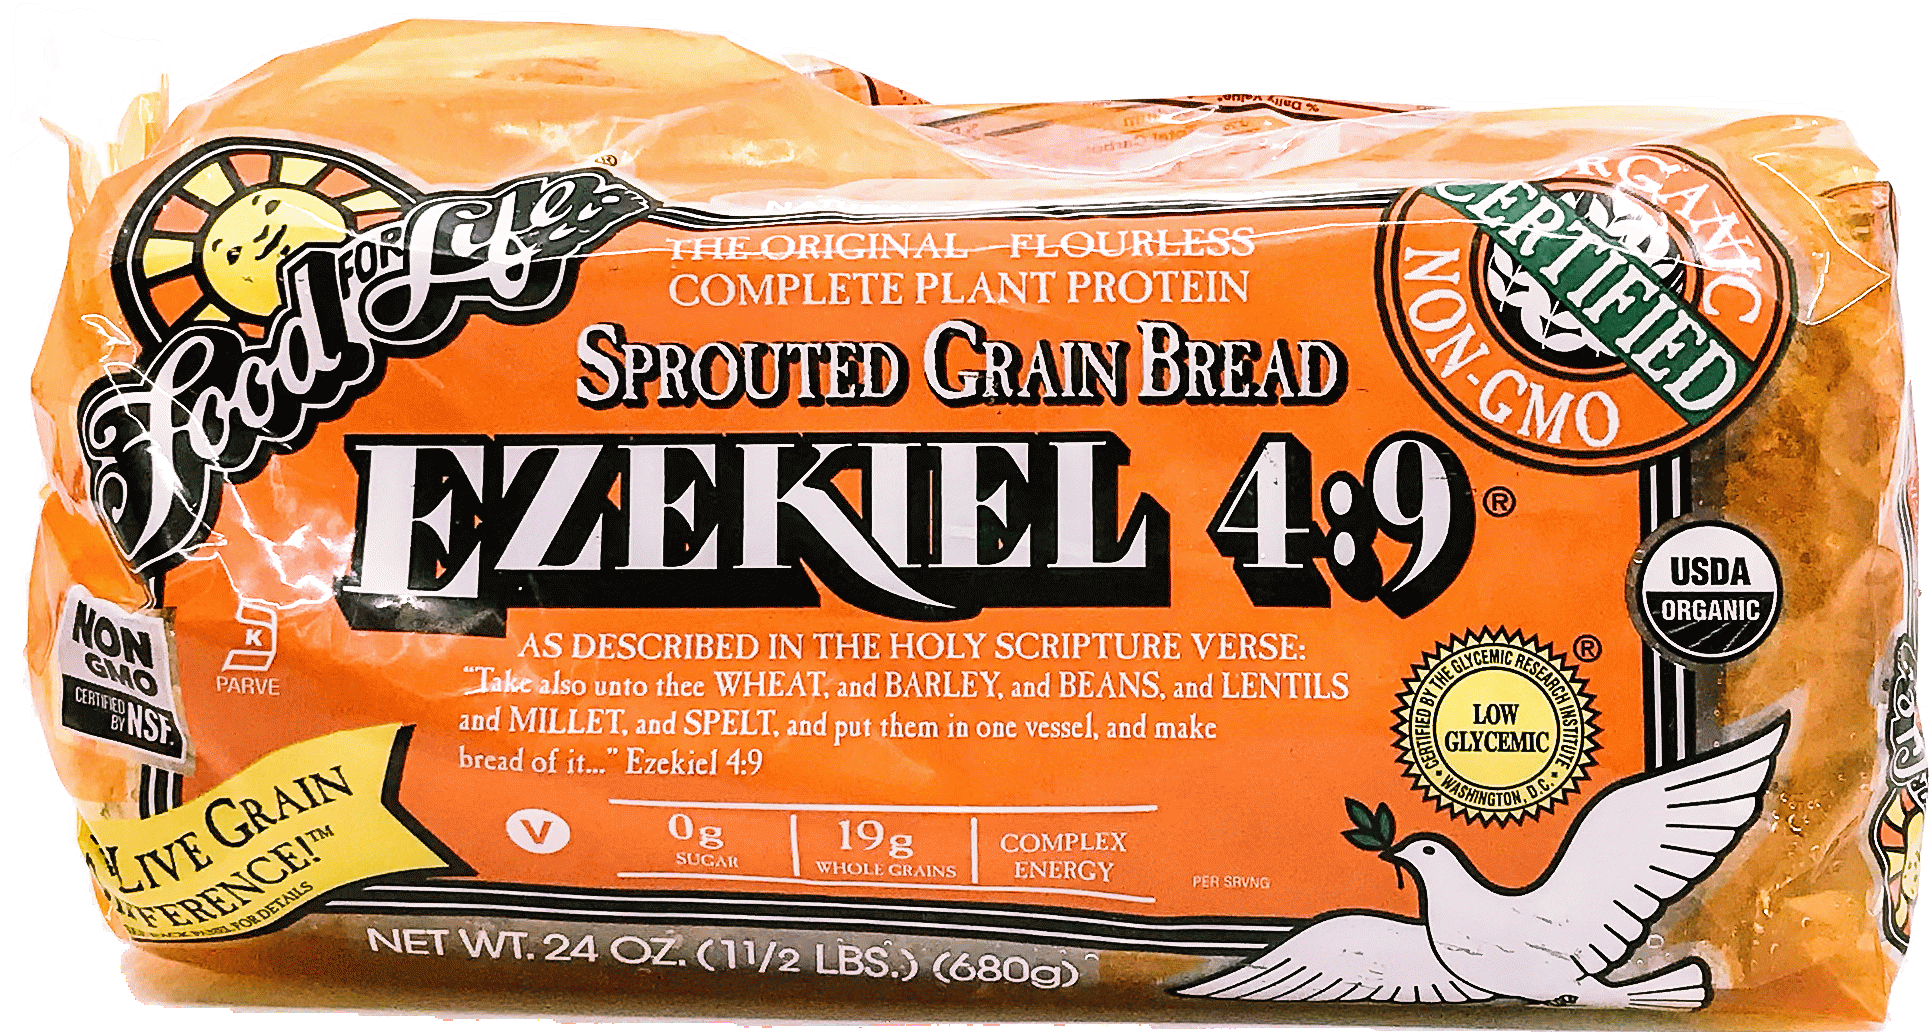 Food For Life Ezekiel 4:9 sprouted 100% whole grain bread Full-Size Picture